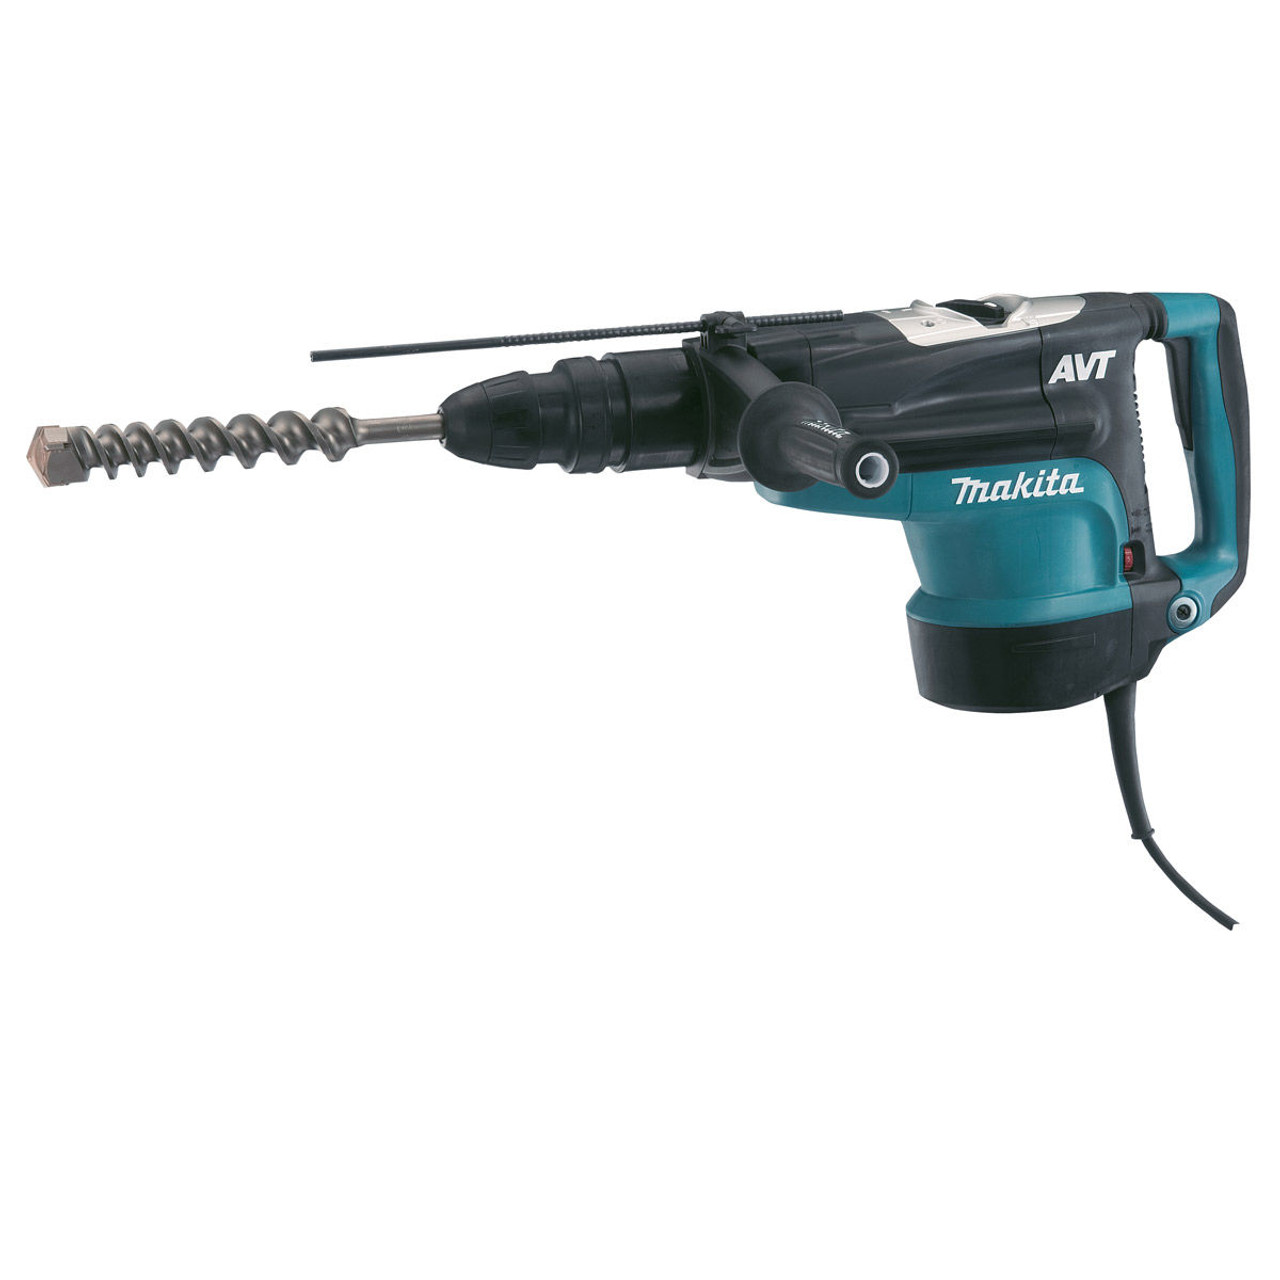 Makita HR5211C SDS Max Rotary Demolition Hammer Drill with A